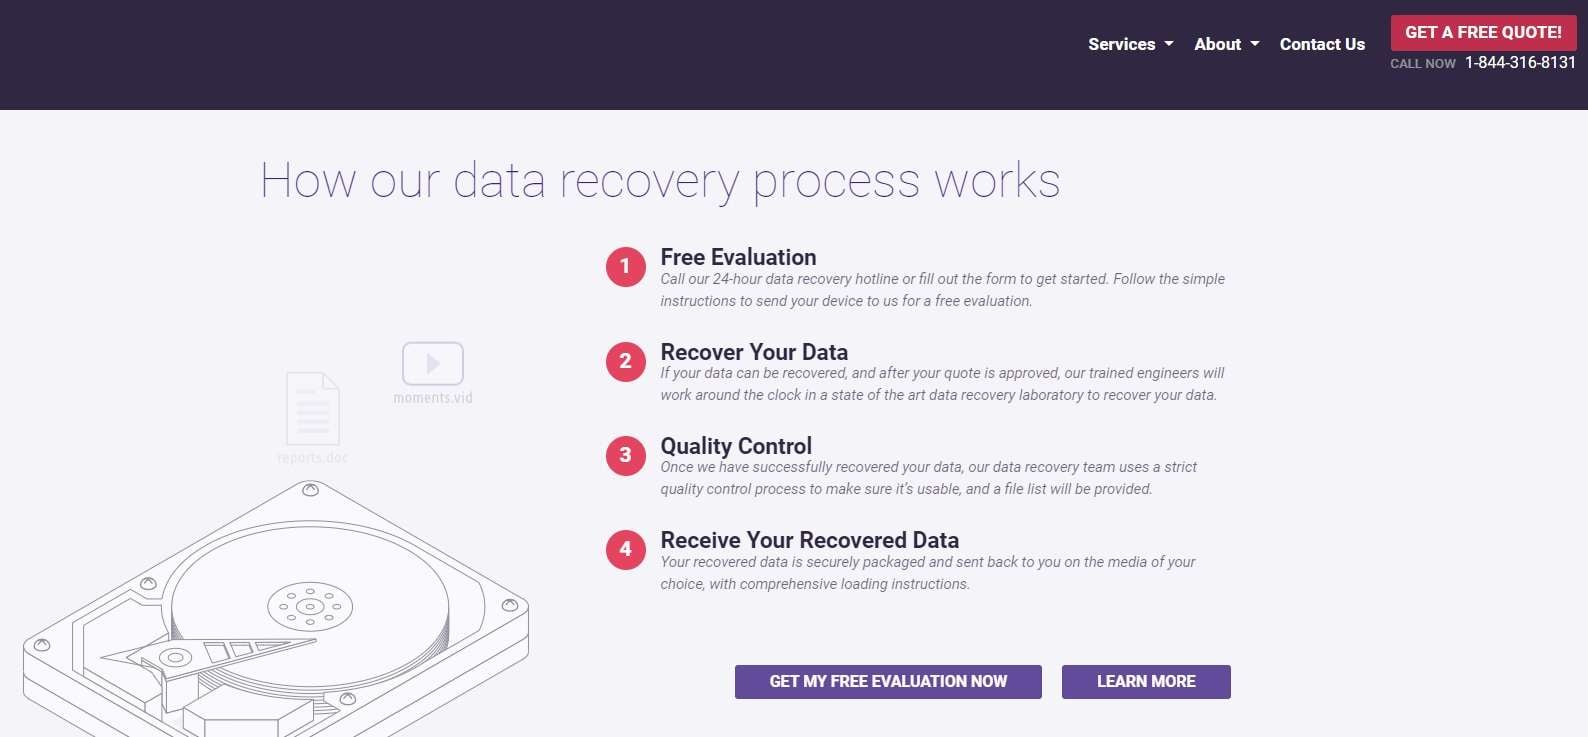 cbl's four-step data recovery process